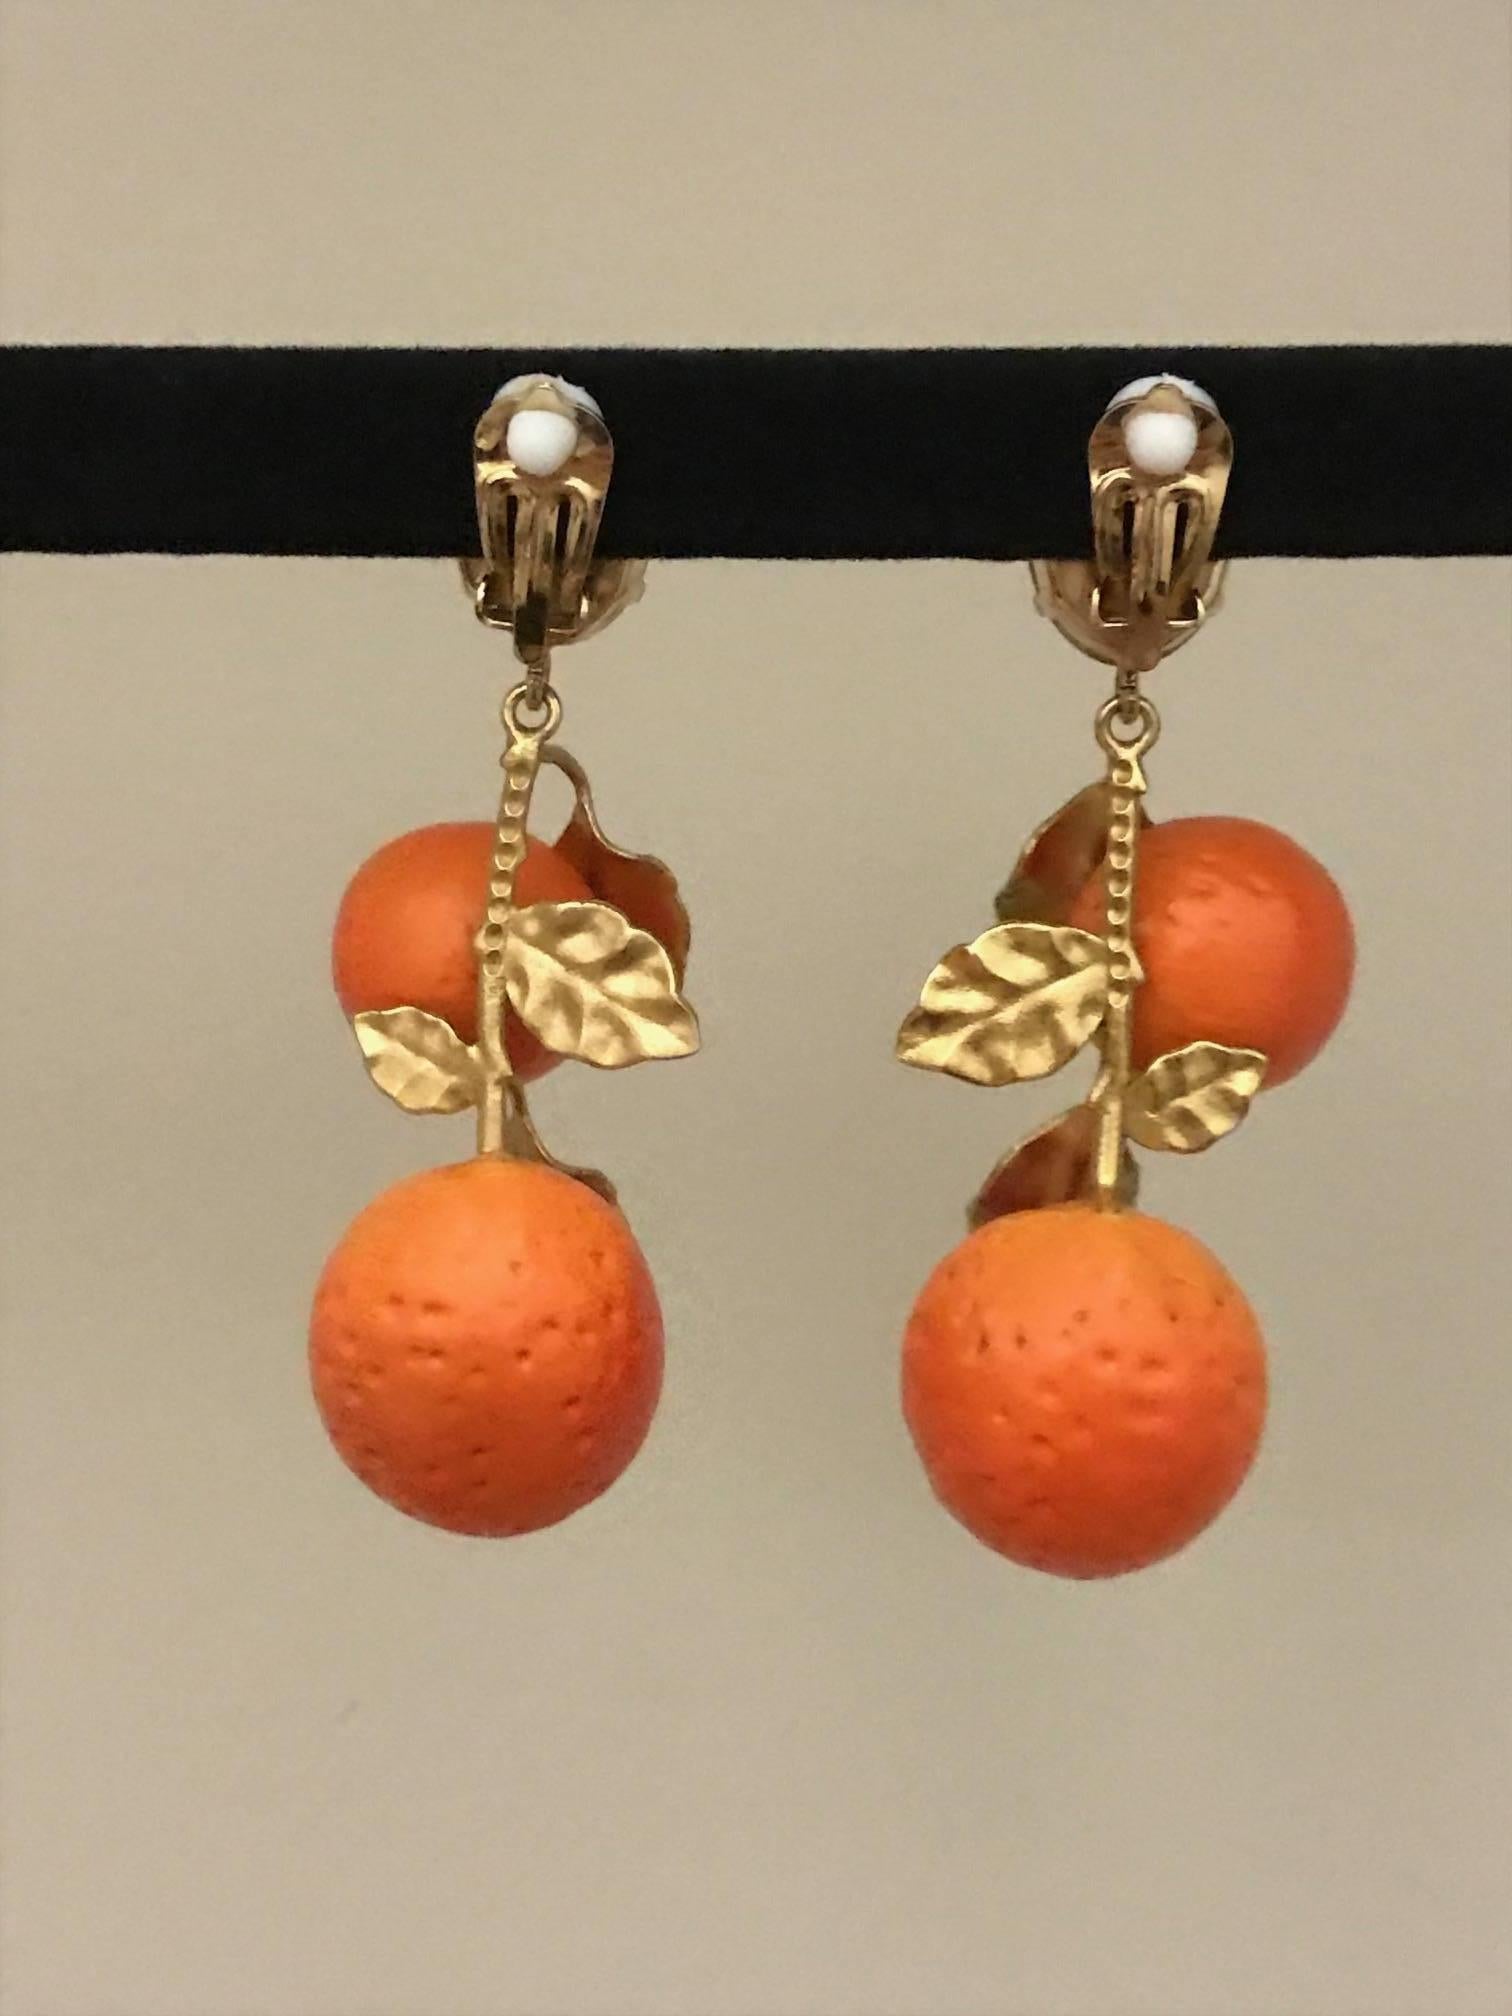 Dolce & Gabbana summer 2016 gold tone brass drop earrings featuring pale beige crystal tops and hanging textured resin oranges with green painted leaves. 

Clip on.

Signed Dolce & Gabbana at backs.

Made in Italy. 

Approximately